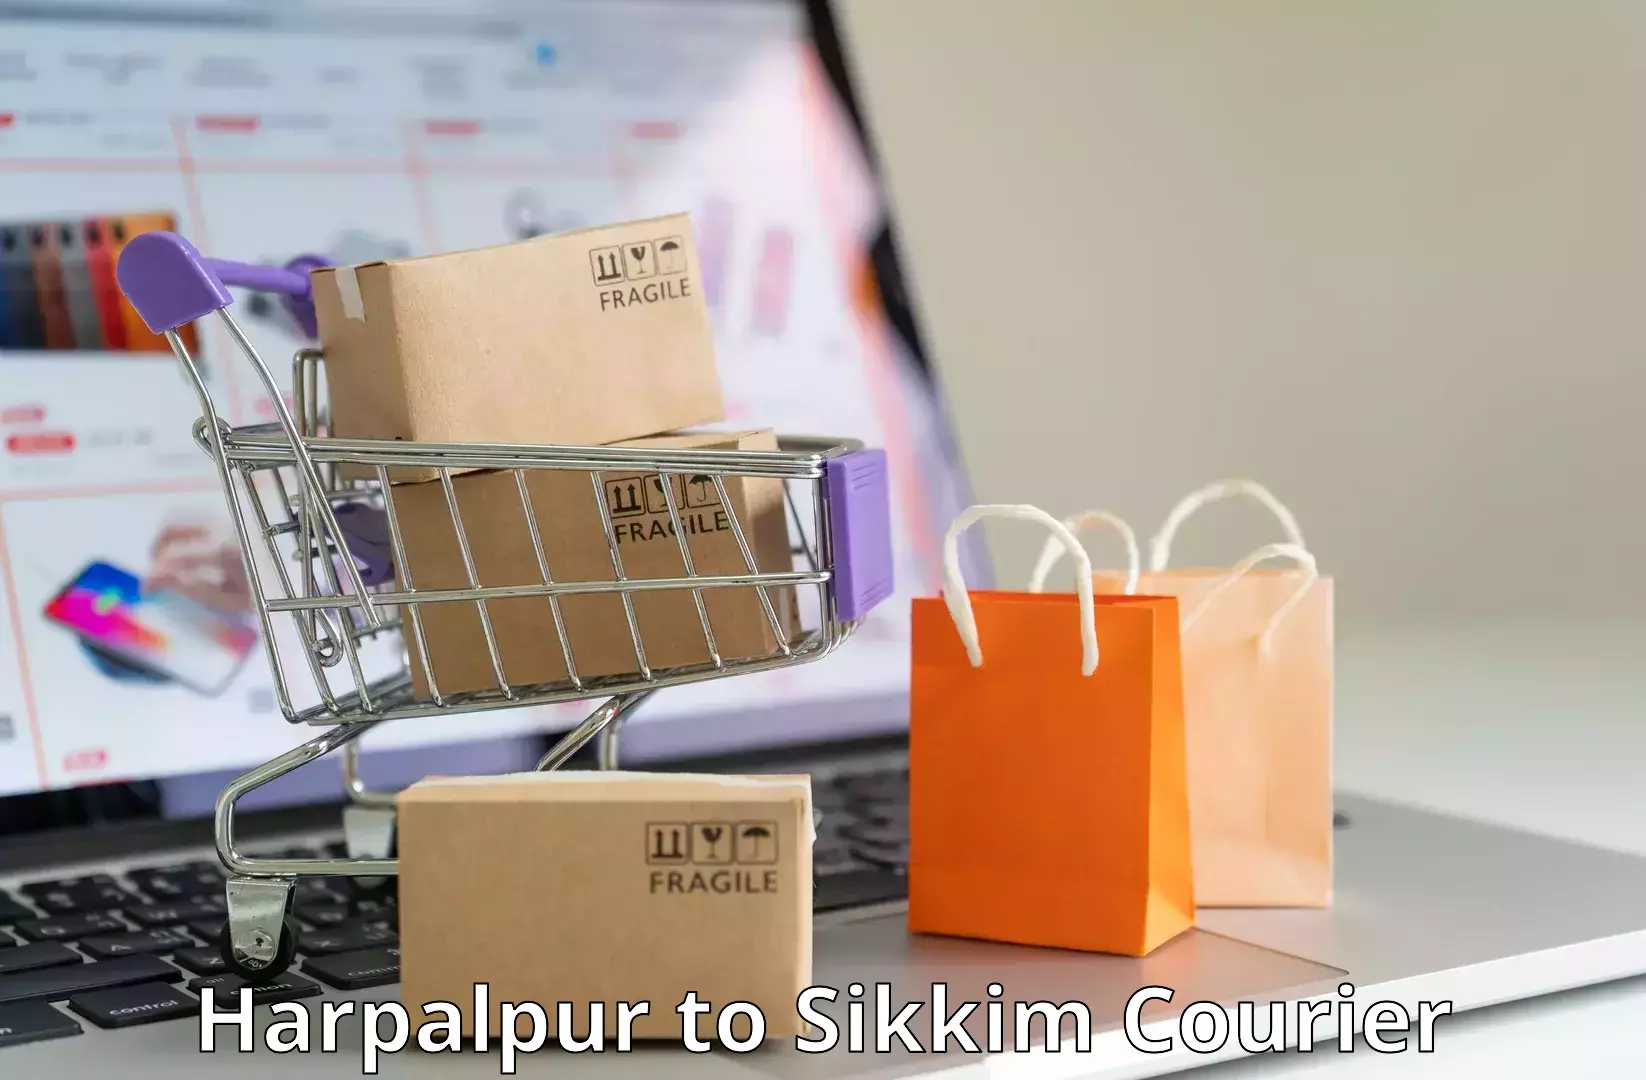 Fastest parcel delivery Harpalpur to Sikkim